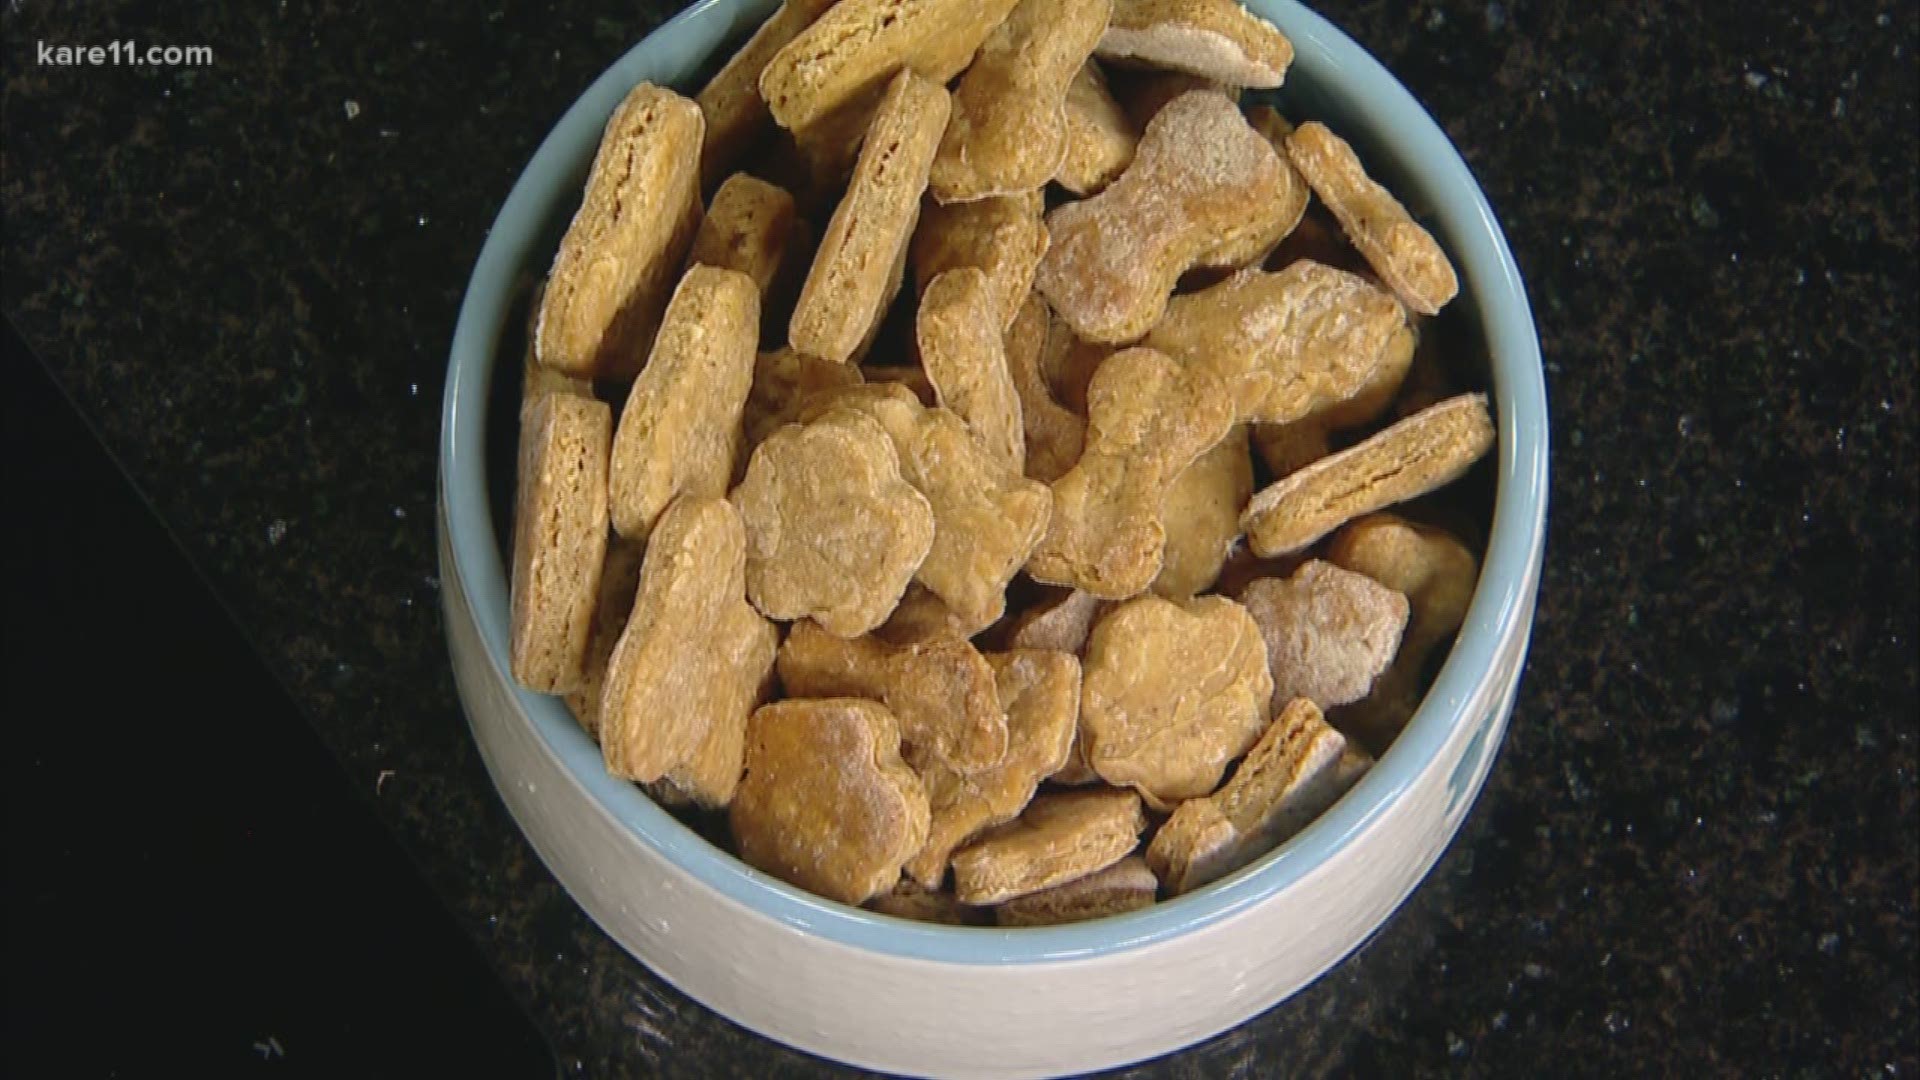 A simple but healthy way to make homemade treats for your puppers! Diana Hall from Camp Bow Wow shows us how.